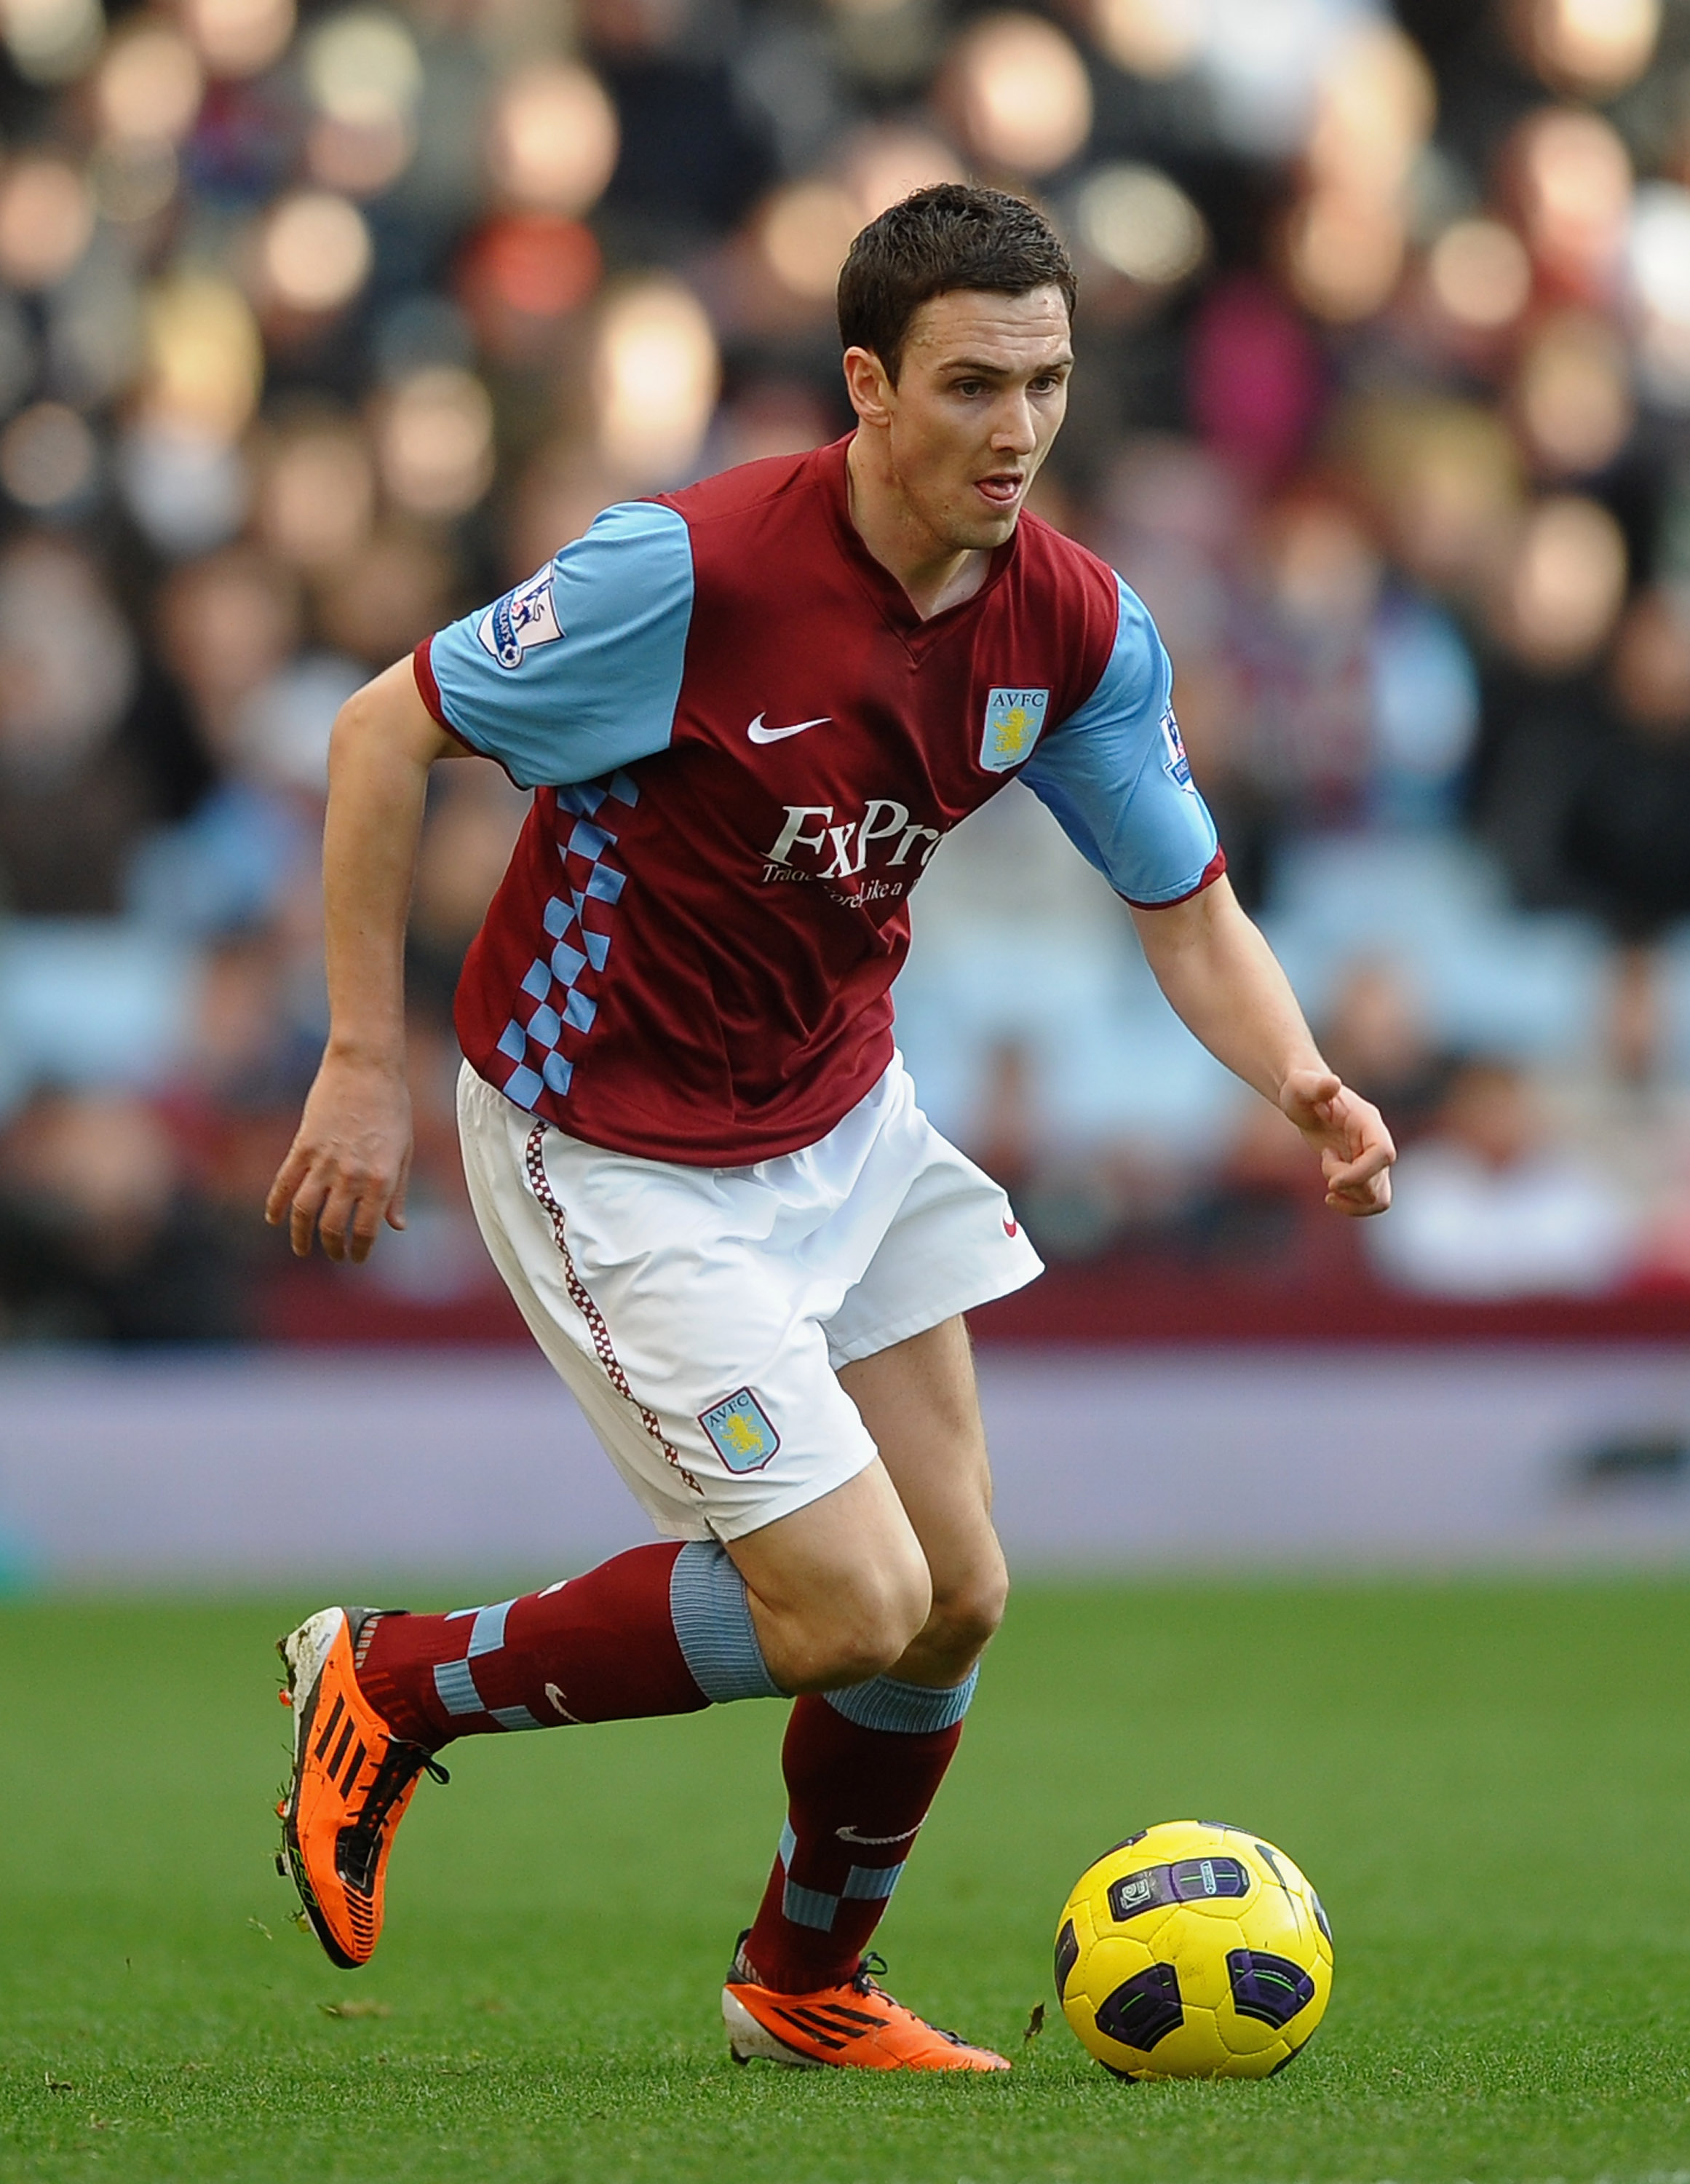 BIRMINGHAM, ENGLAND - FEBRUARY 26: Stewart Downing of Aston Villa in action during the Barclays Premier League match between Aston Villa and Blackburn Rovers at Villa Park on February 26, 2011 in Birmingham, England.  (Photo by Laurence Griffiths/Getty Im